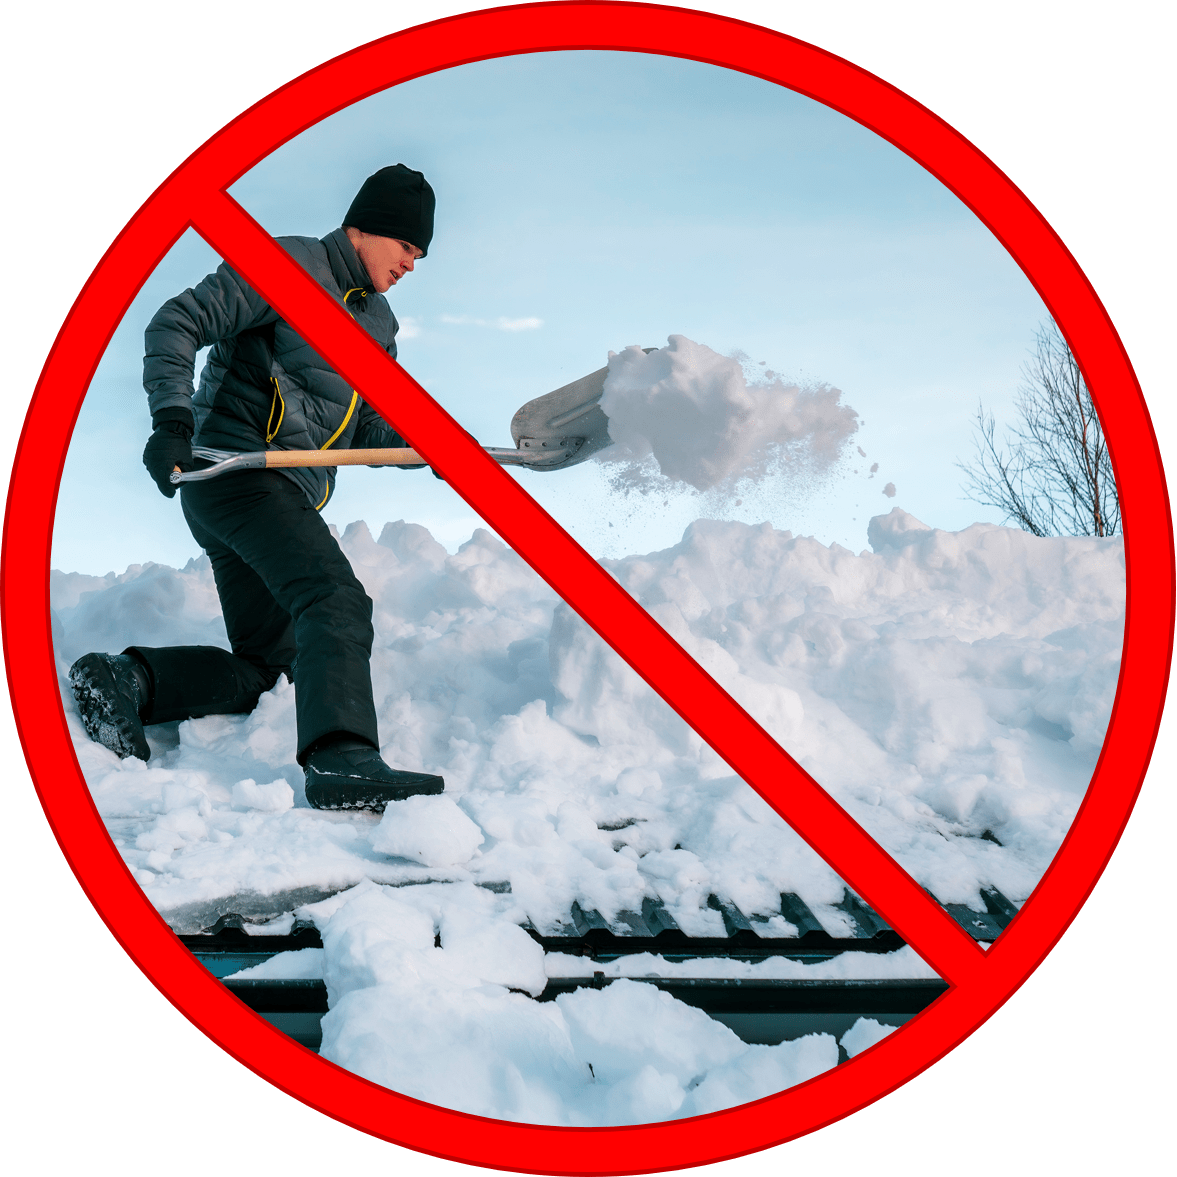 Snow Clearing Caution